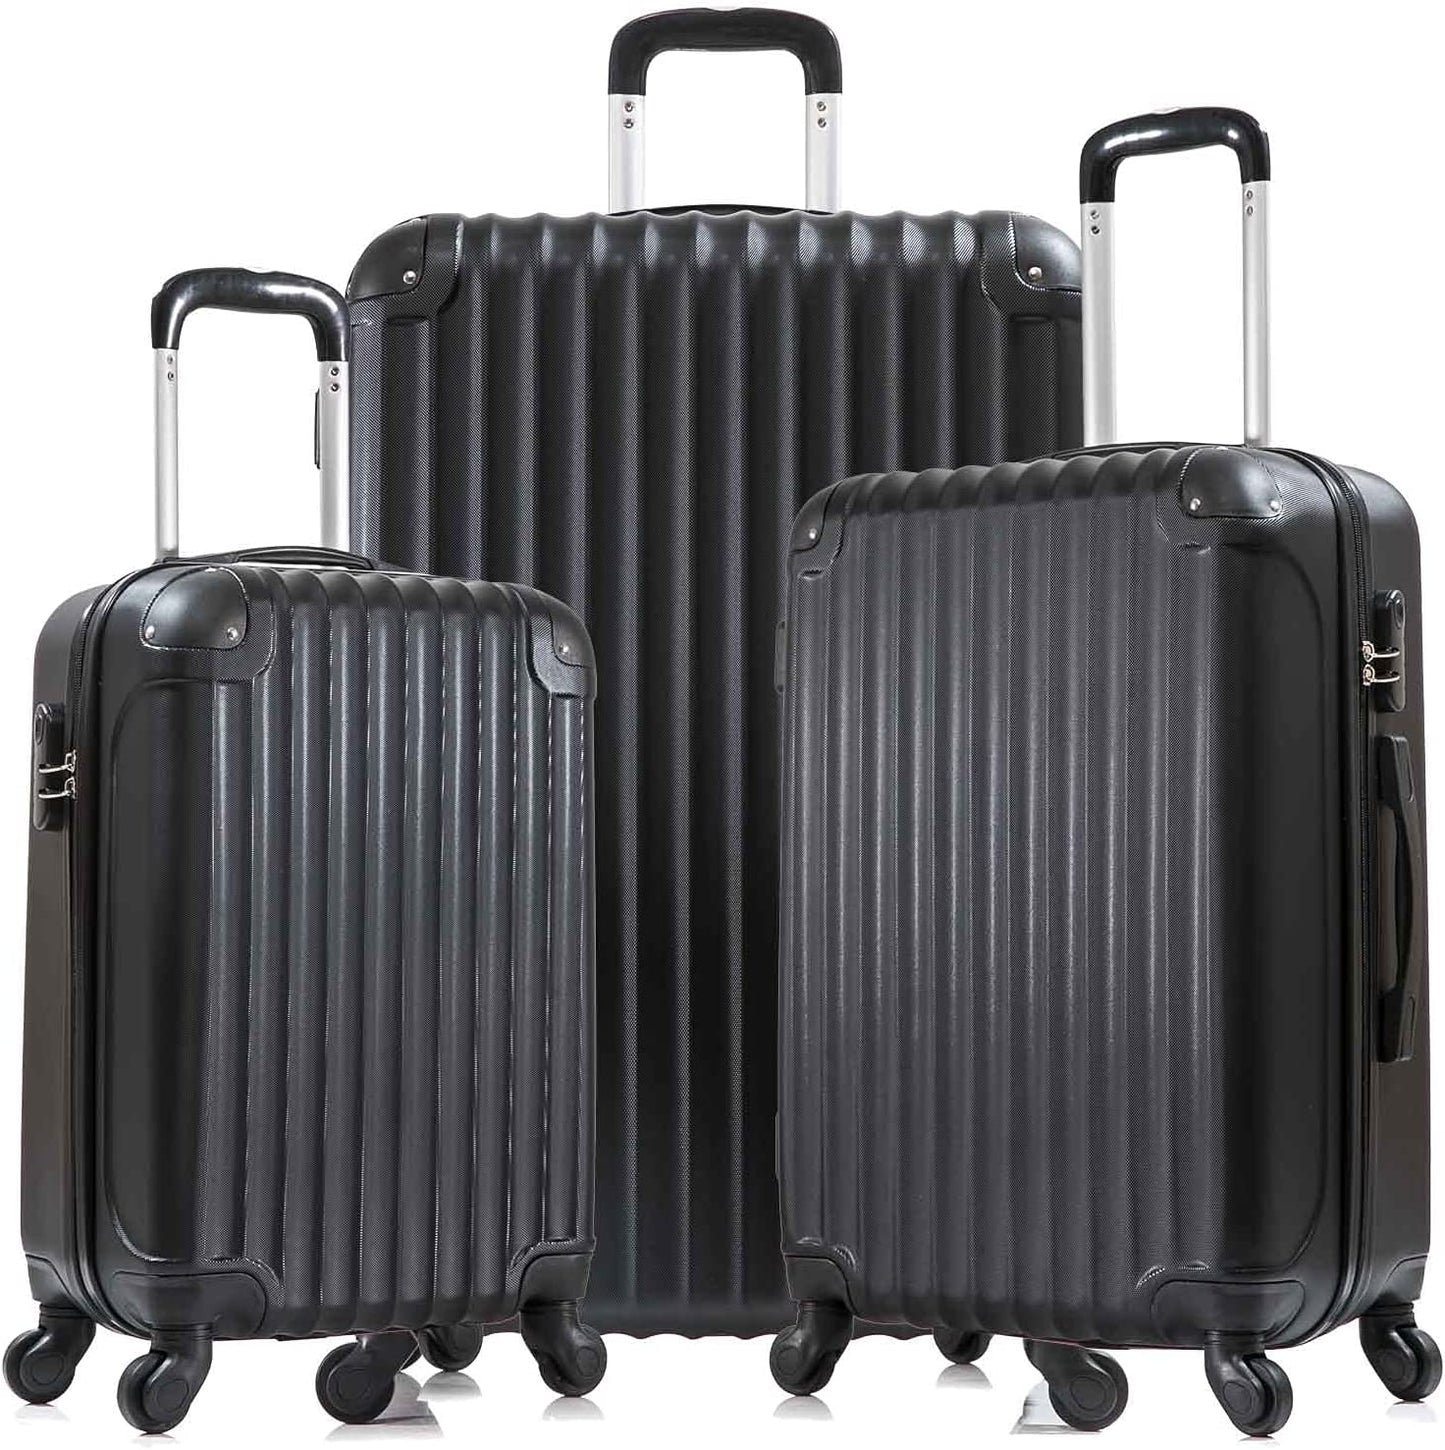 3 Piece Suitcase with Spinner Wheels, Luggage Suitcases Lightweight Clearance, Travel Luggage Set Includes 20 /24 /28 Inch